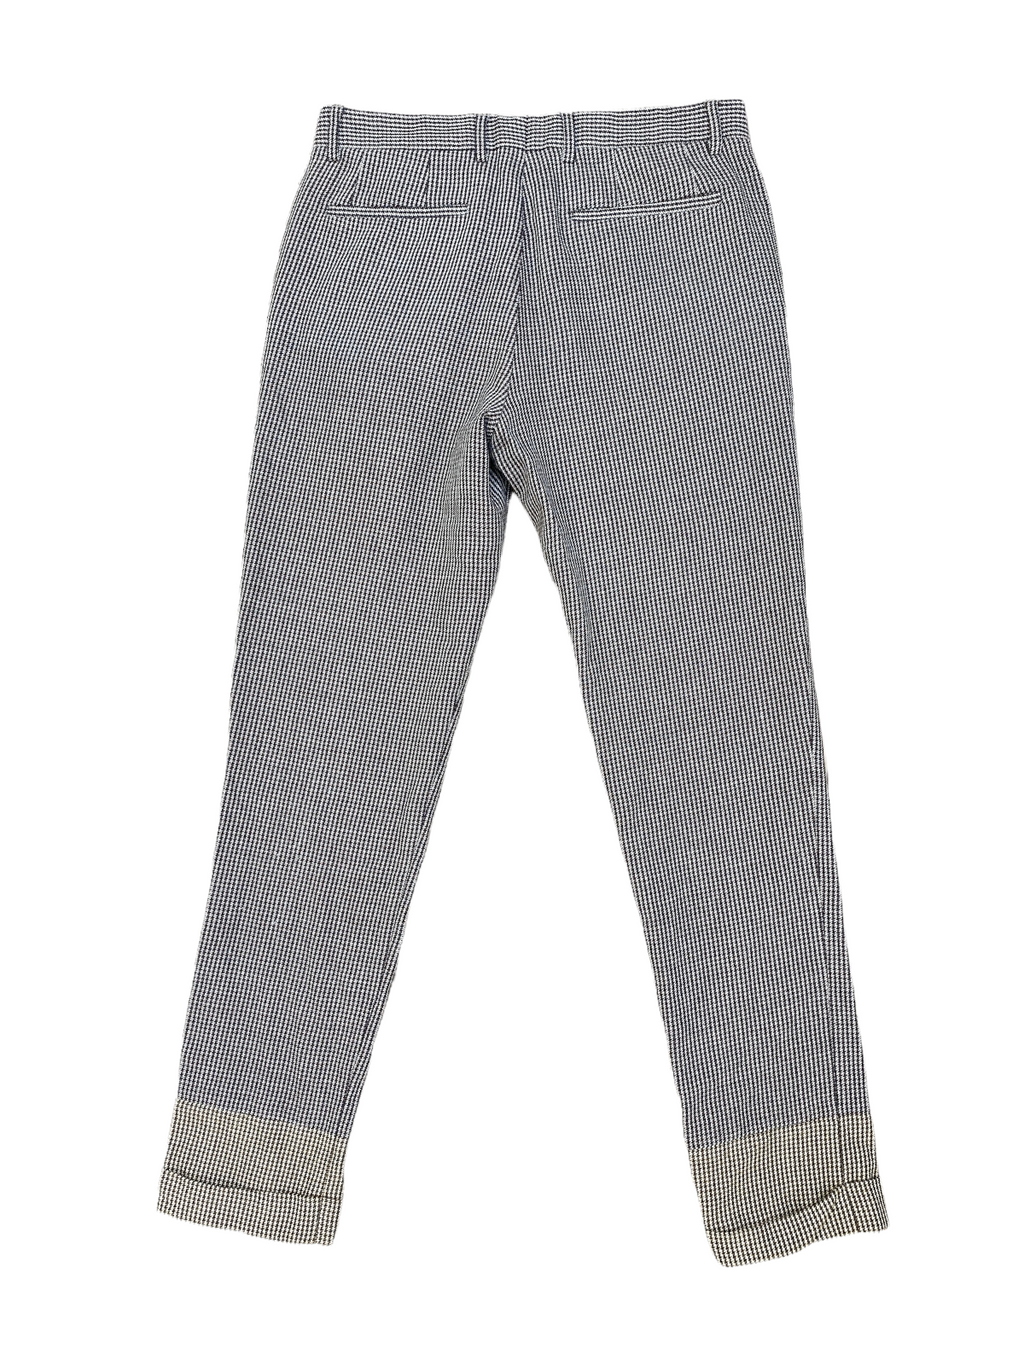 FW 2015 Fusion of Two Pants